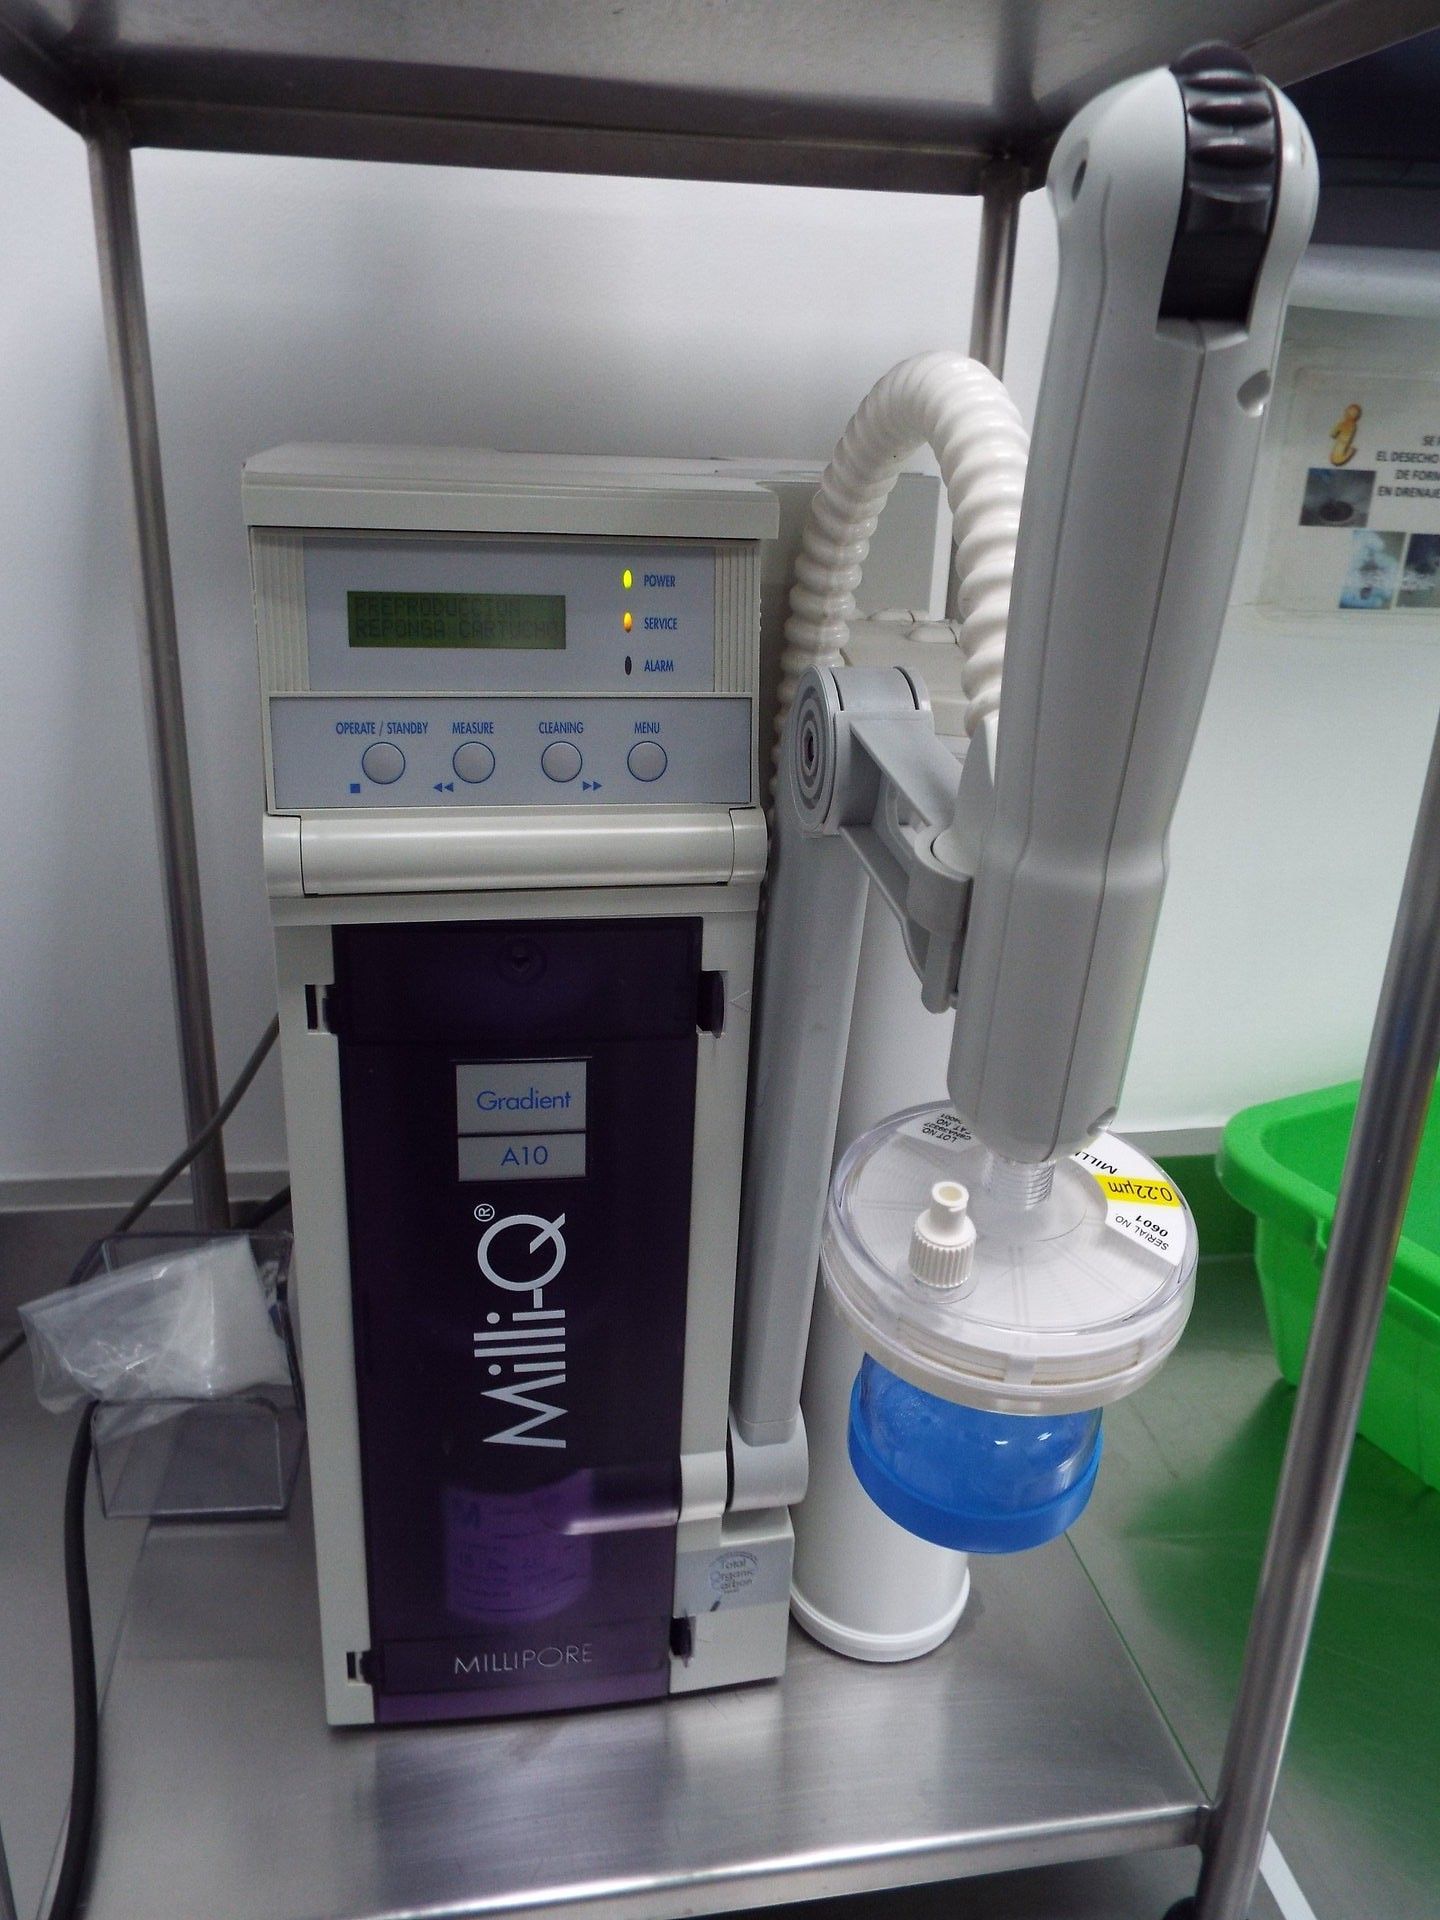 Milli-Q Gradiant A10 water purifying system